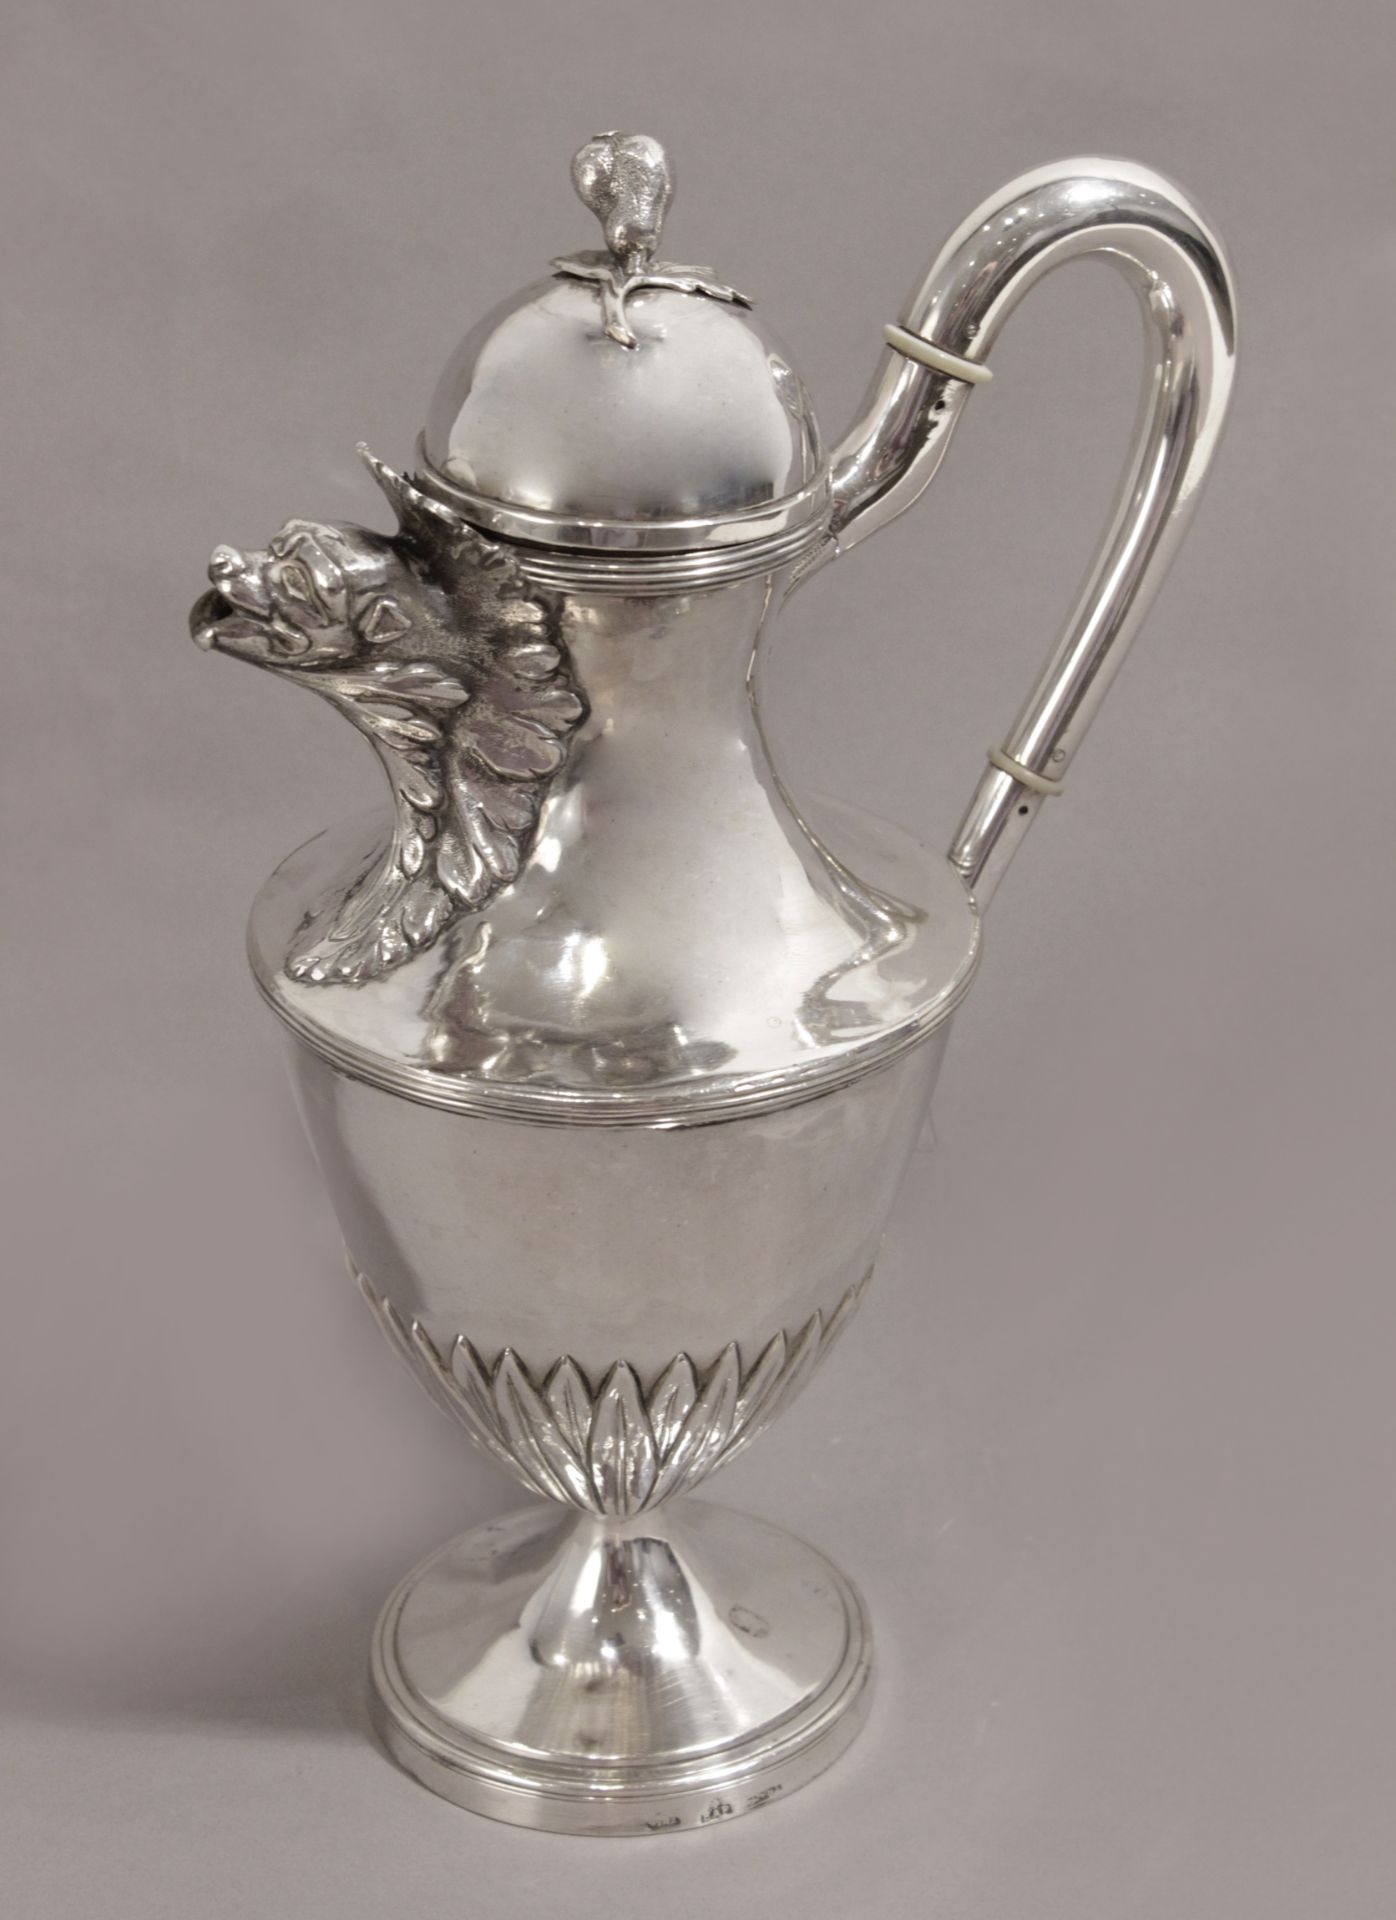 An 18th century silver jug with hallamarks from Barcelona